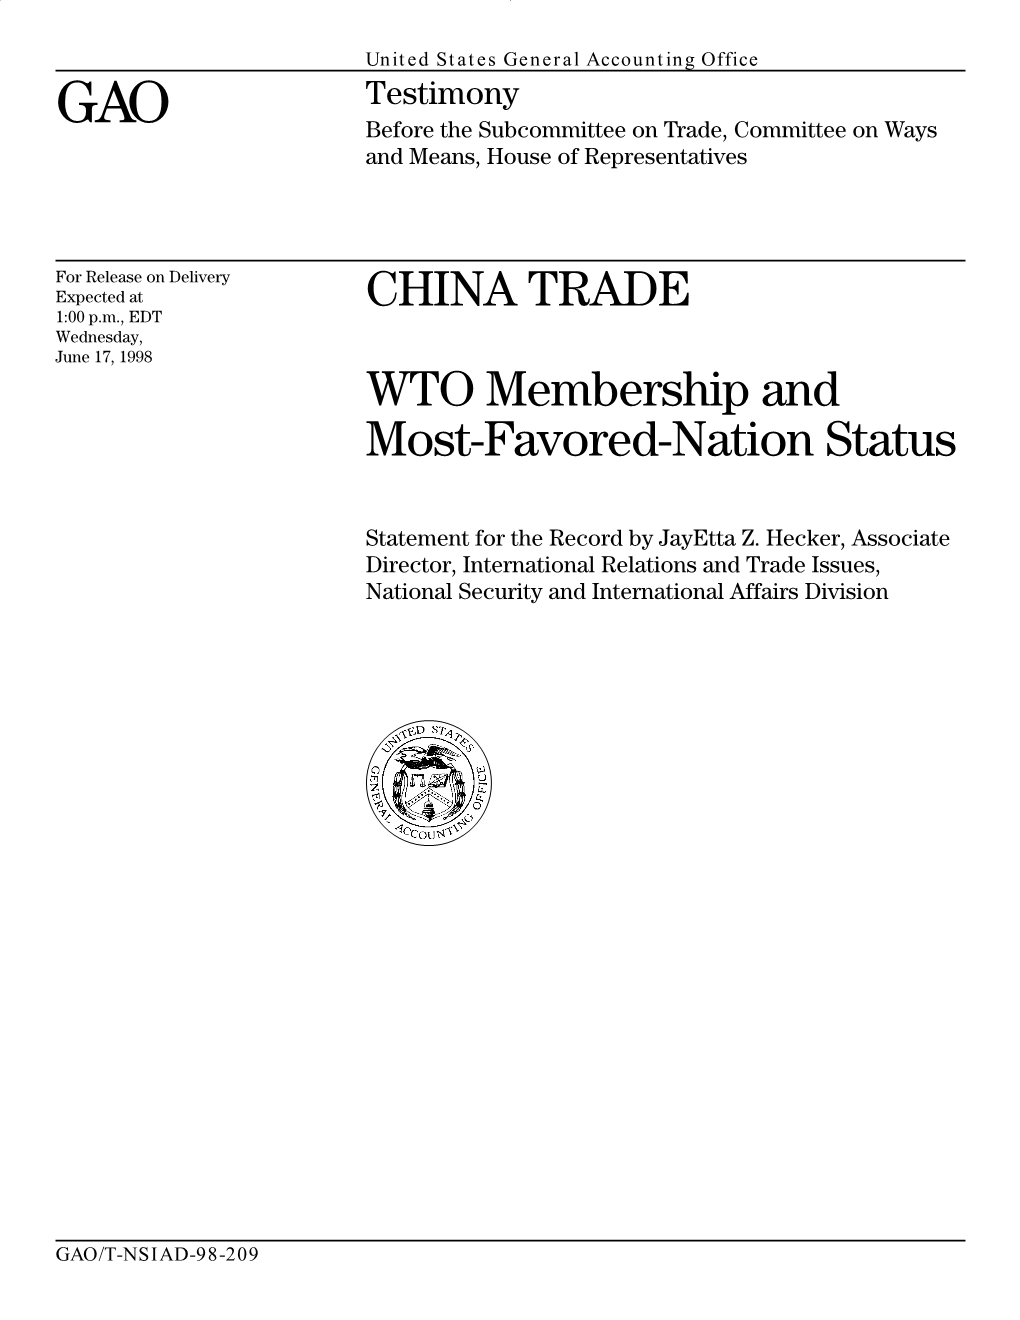 WTO Membership and Most-Favored-Nation Status